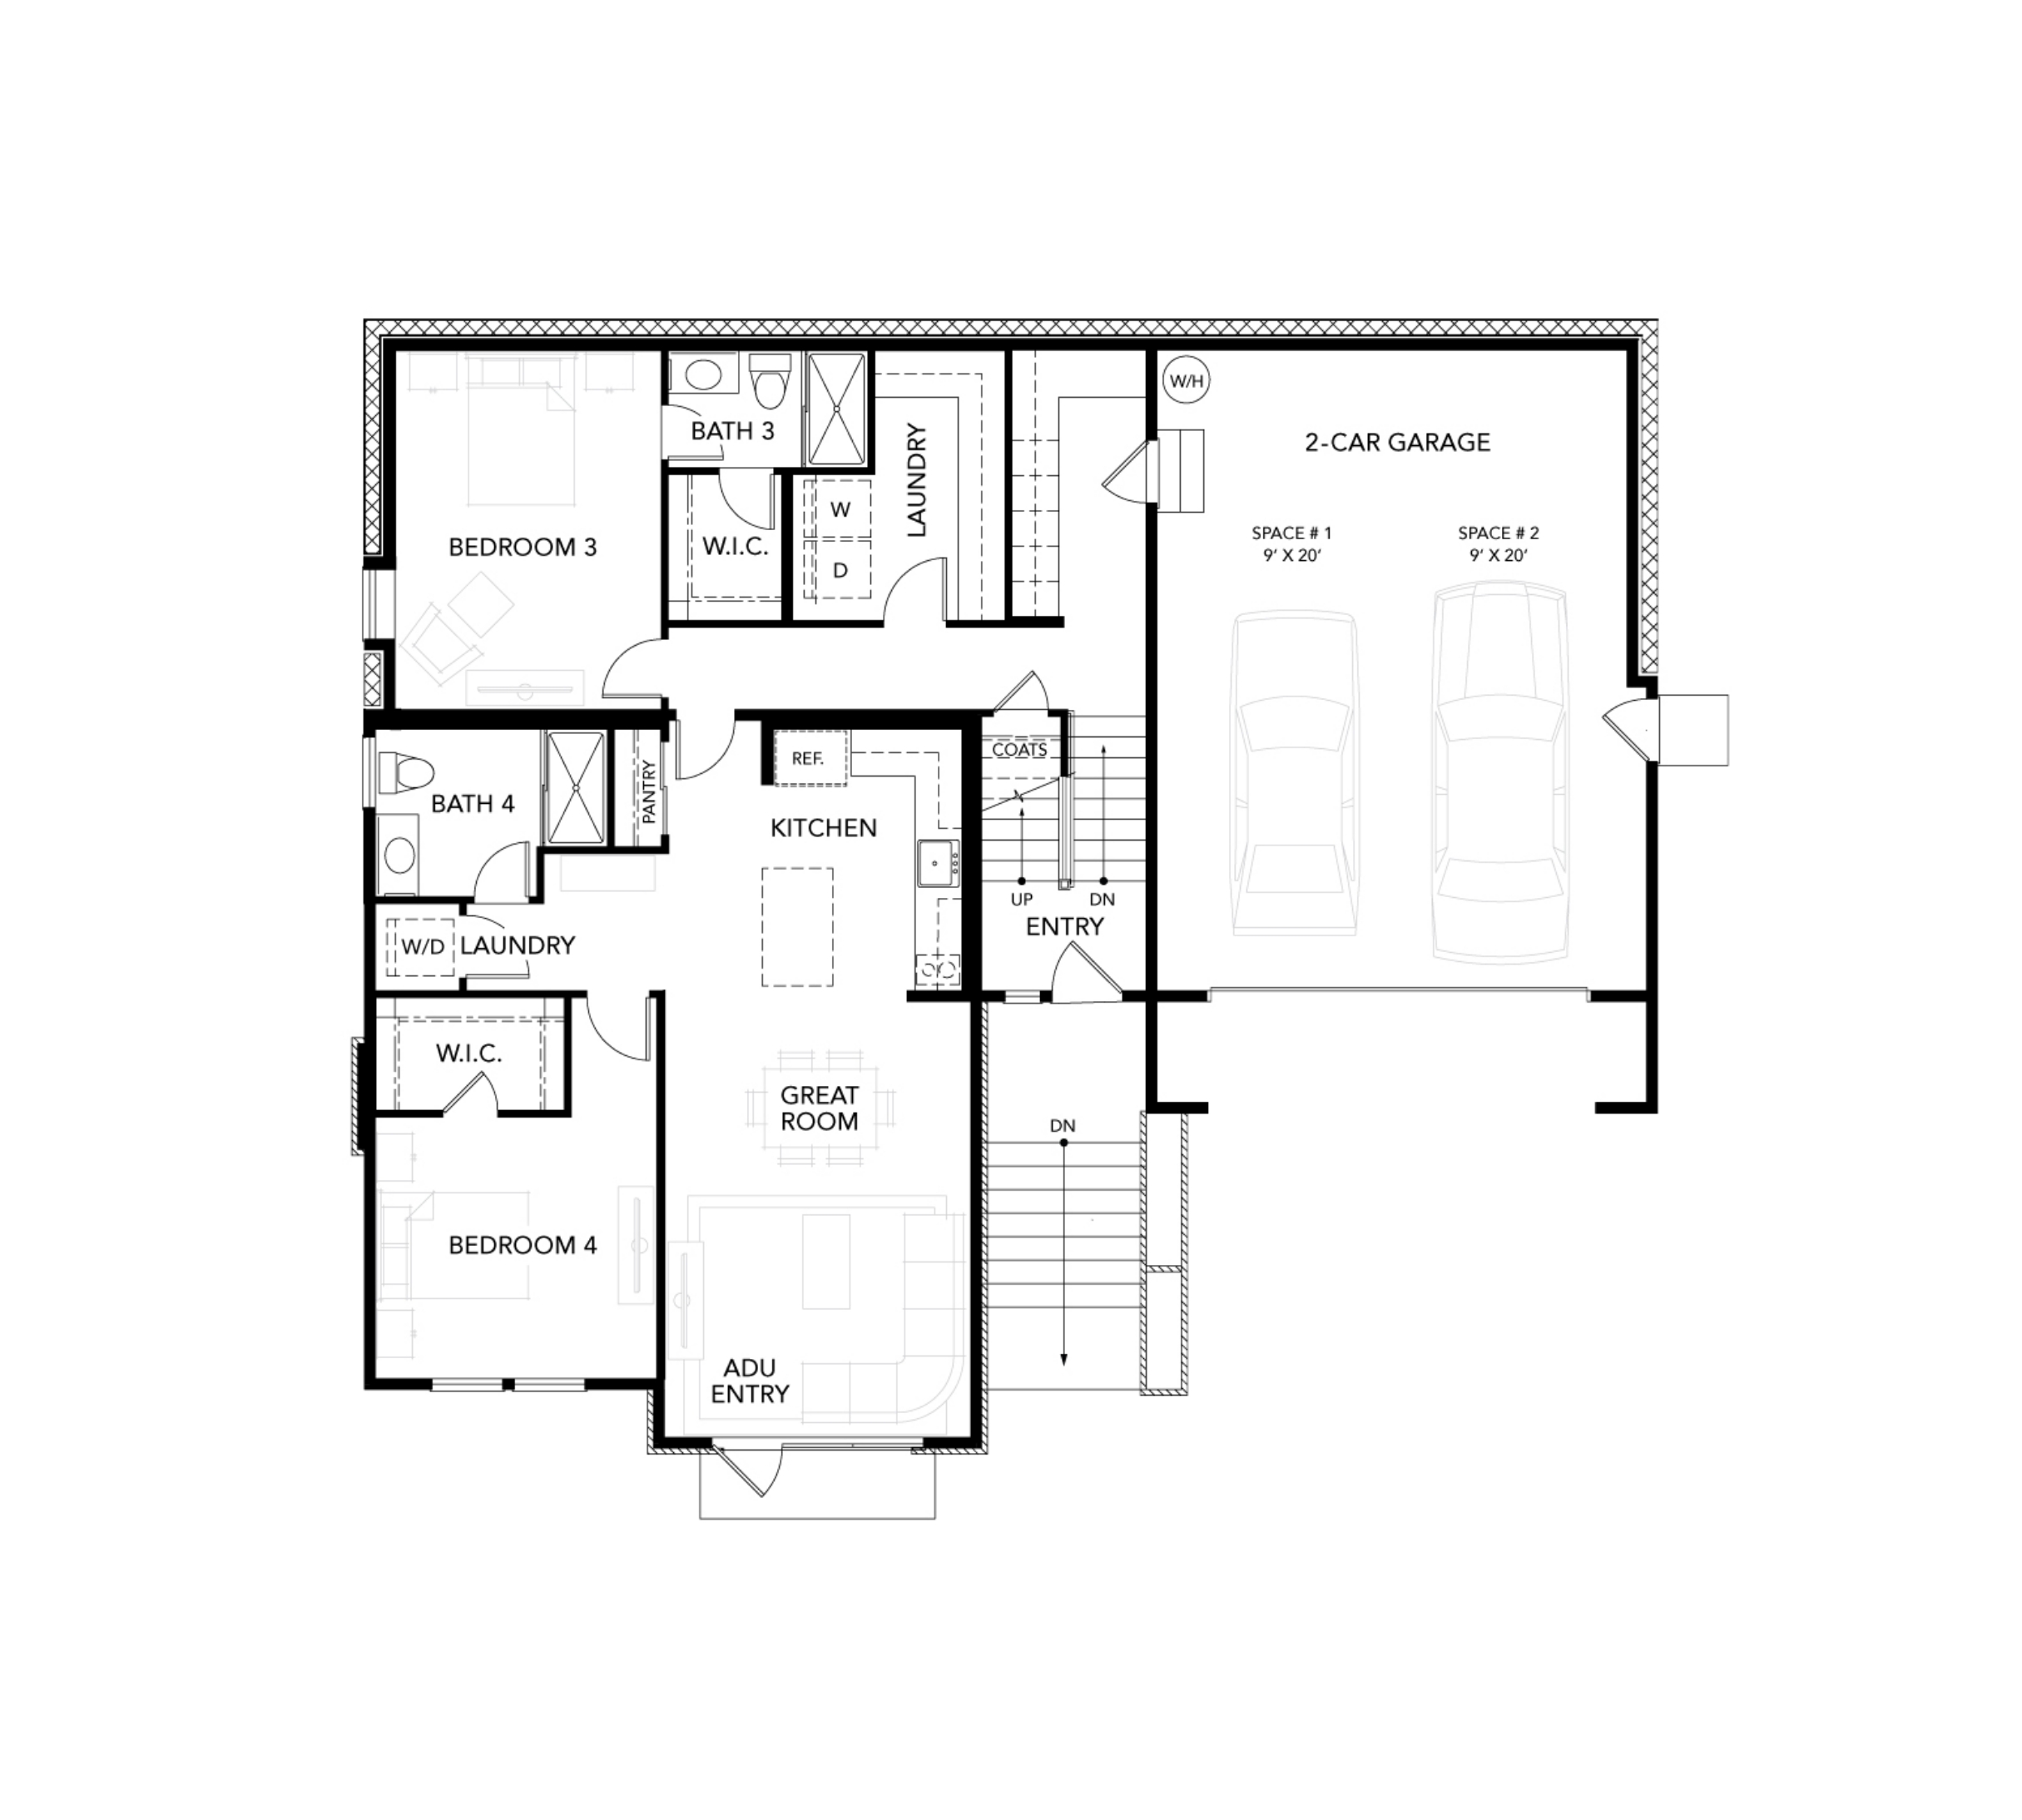 Haven Development's first floor Plan for elevation 1A of the Legacy at Lucas Valley new home development in Marin County, CA